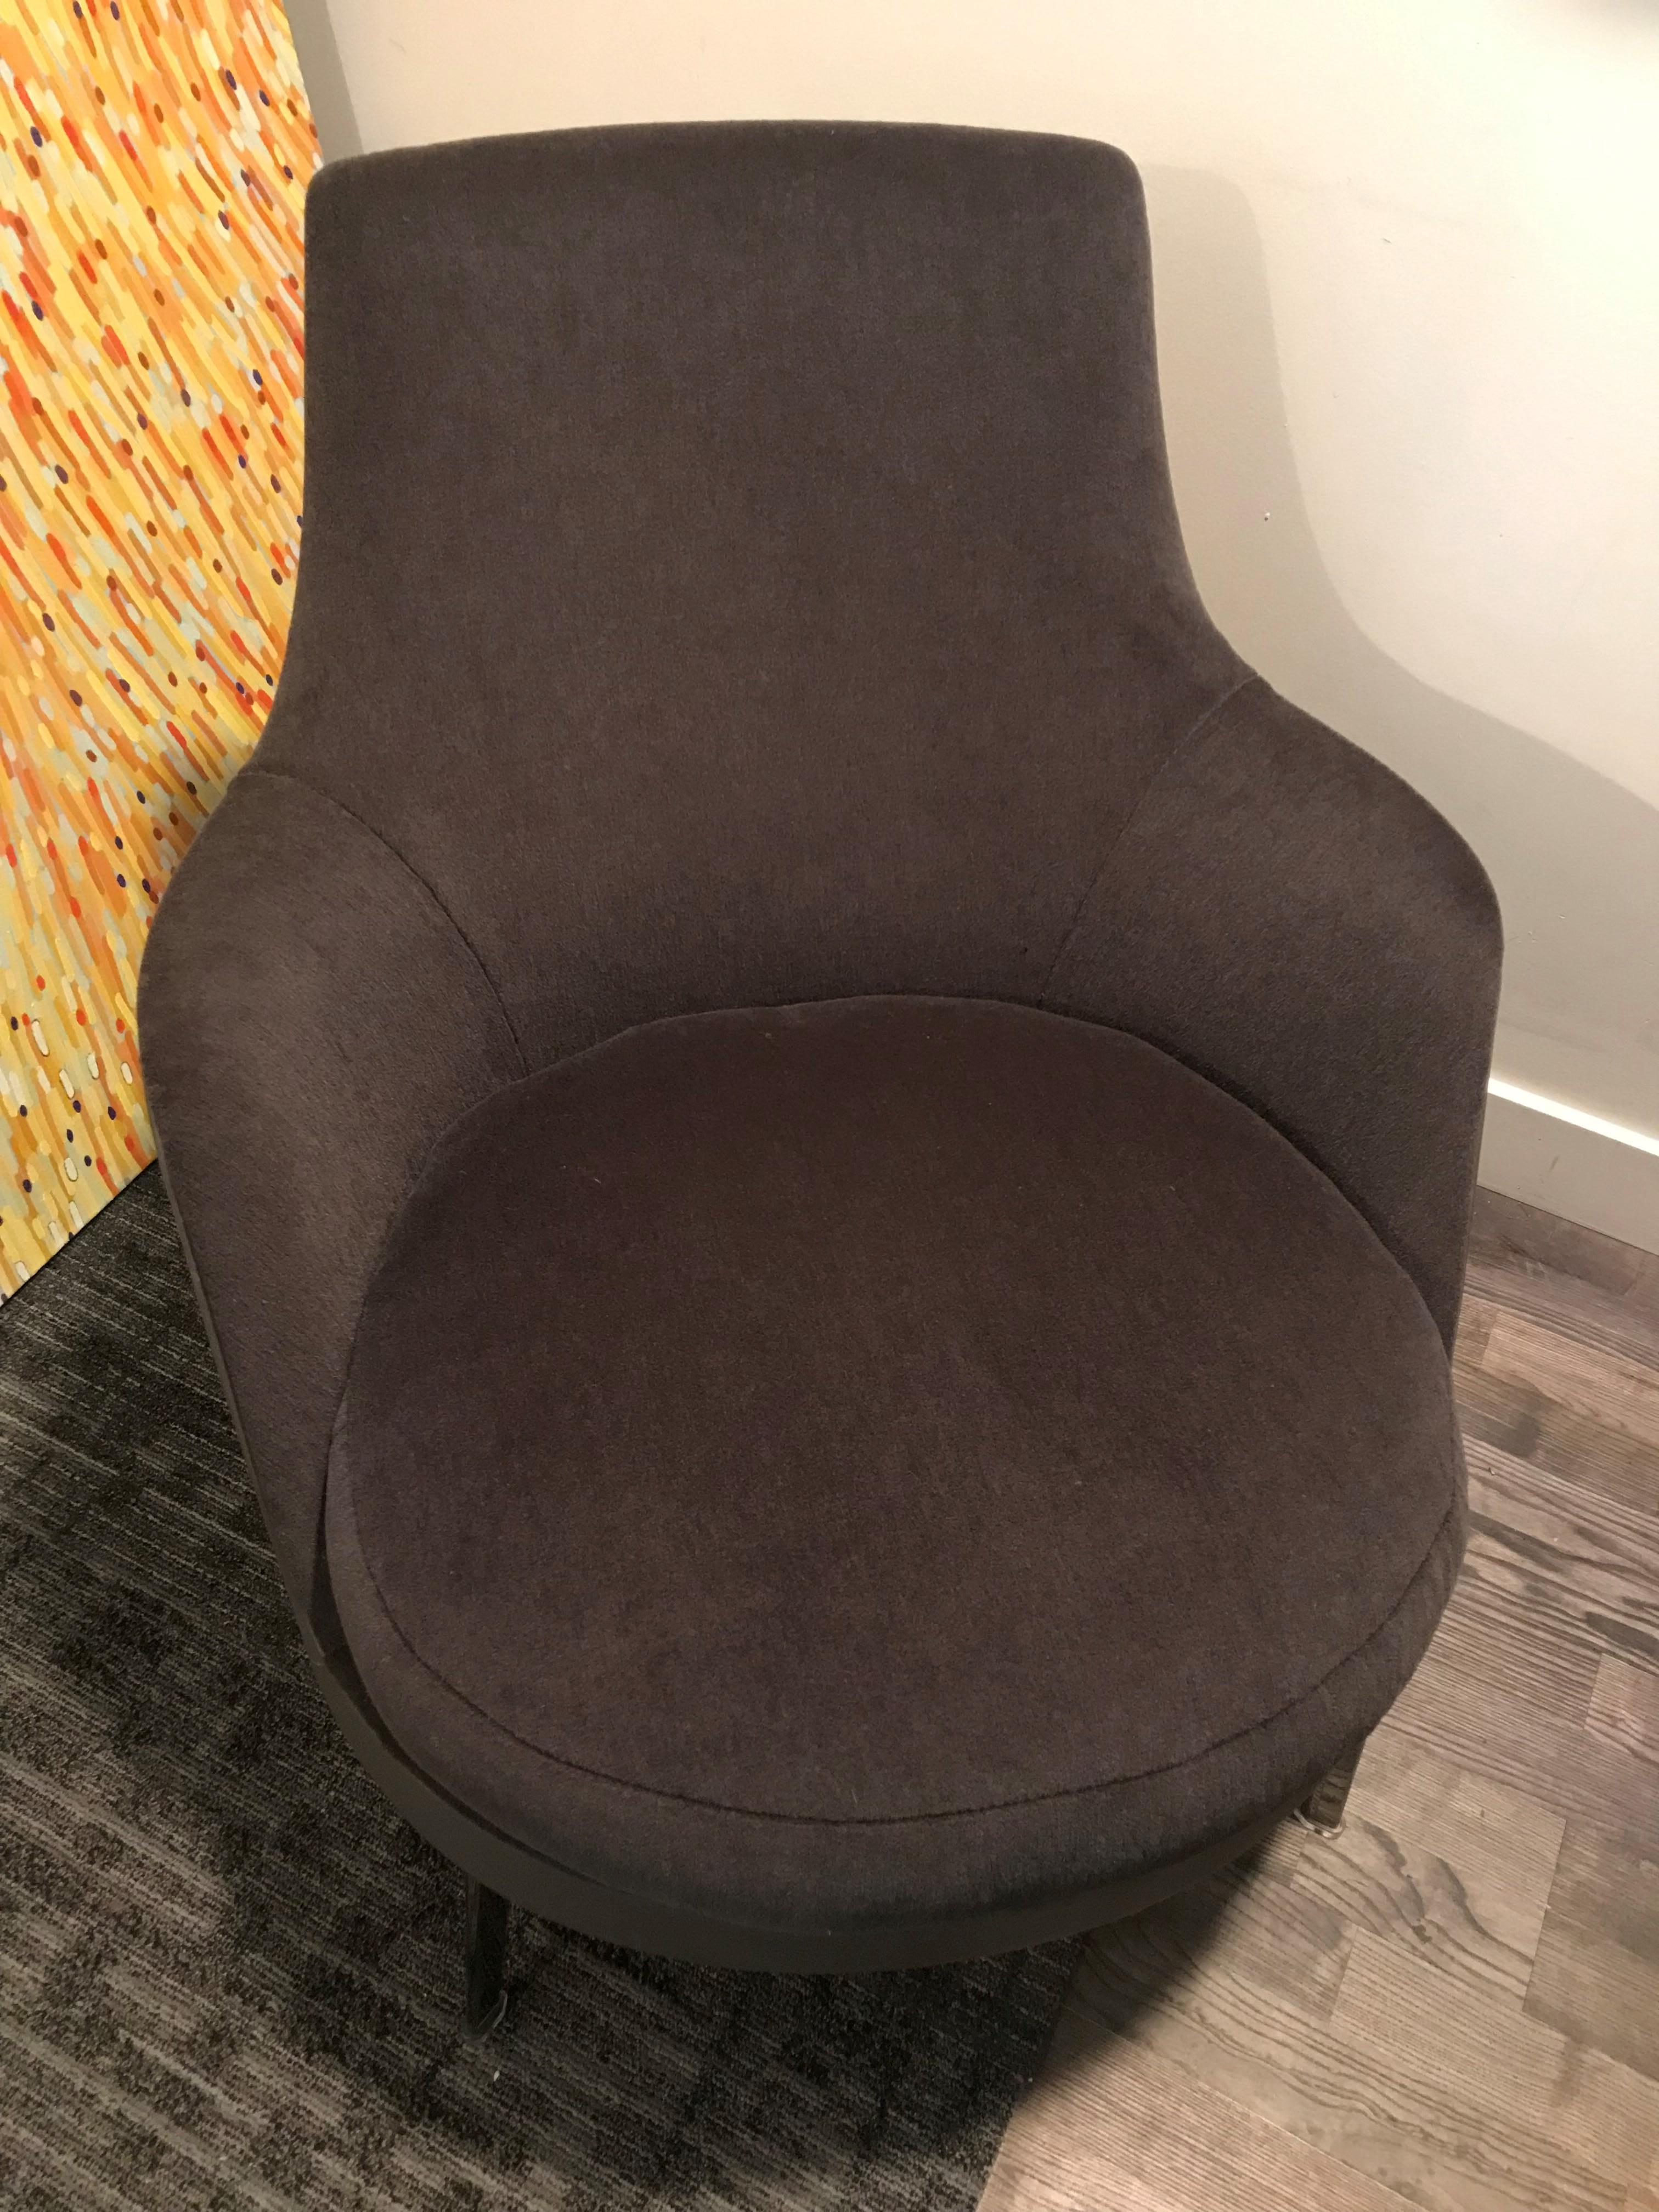 Meet the Guscioalto soft armchair by Flexform. Grey mohair upholstery, with leather frame, sitting on a bronzed metal base, the Guscioalto Soft is a powerful encapsulation of elegance and inviting warmth. It possesses enveloping lines and impeccable